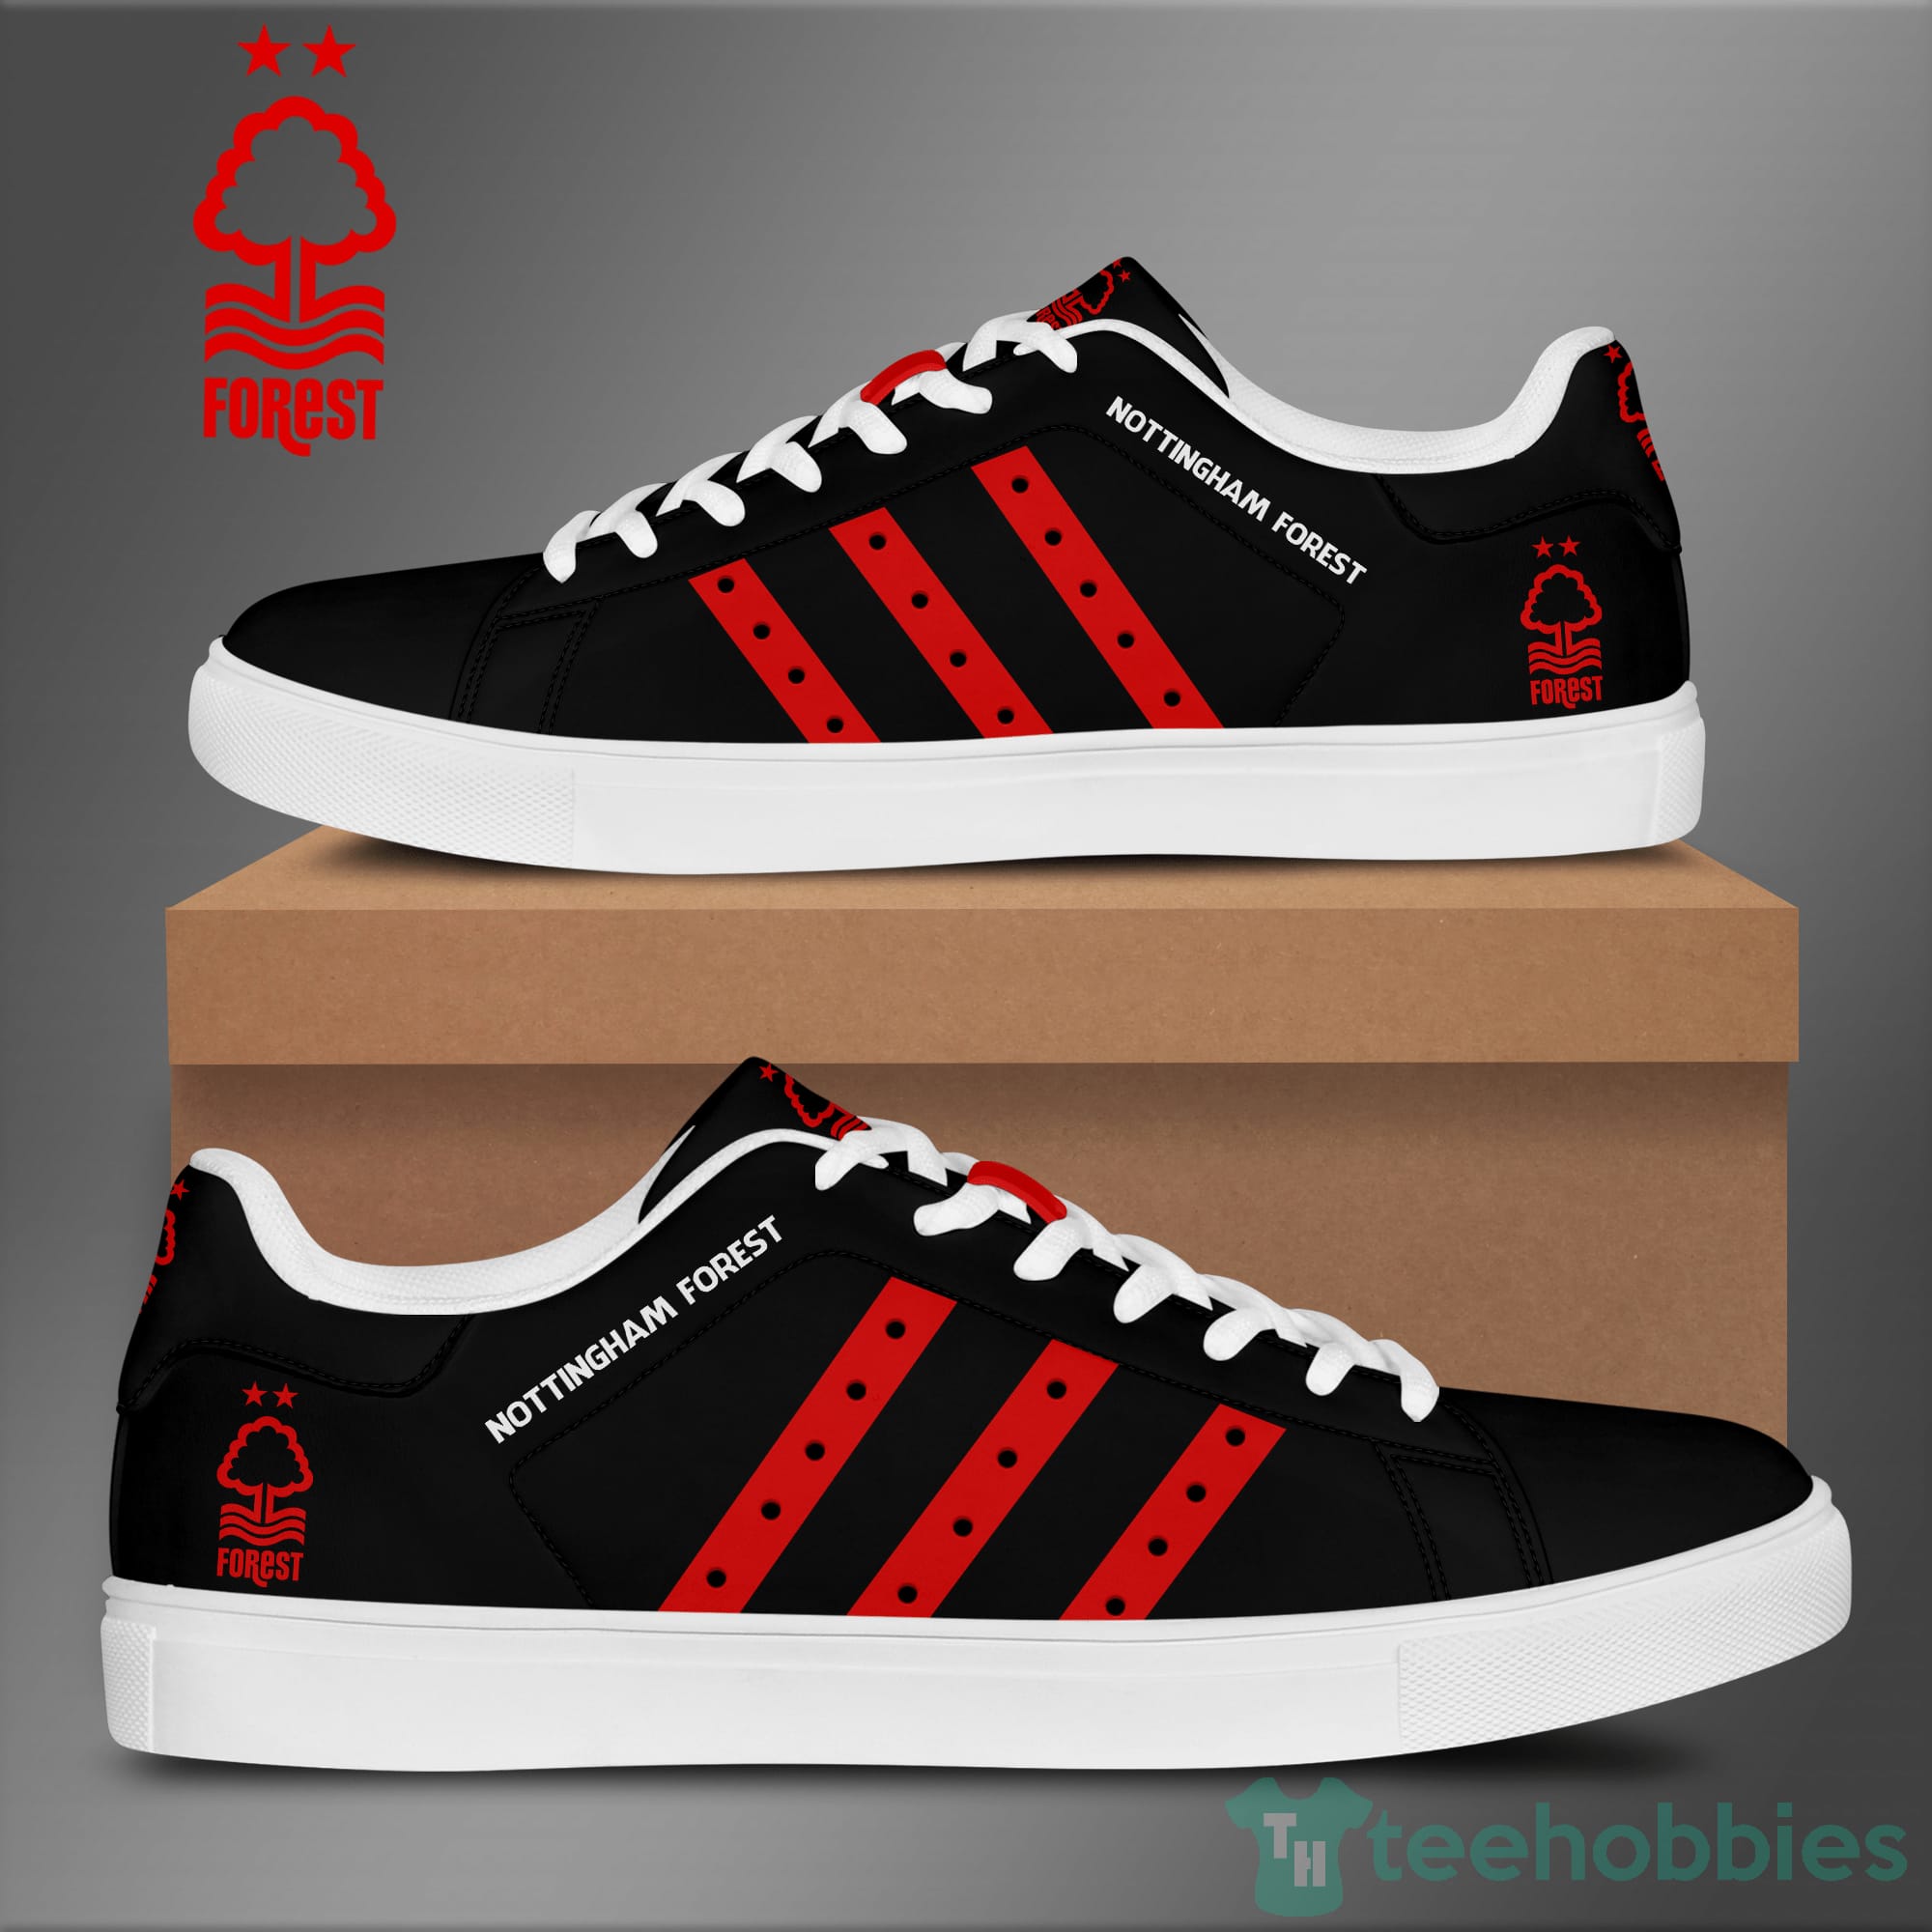 Nottingham Forest Fc Low Top Skate Shoes Product photo 2